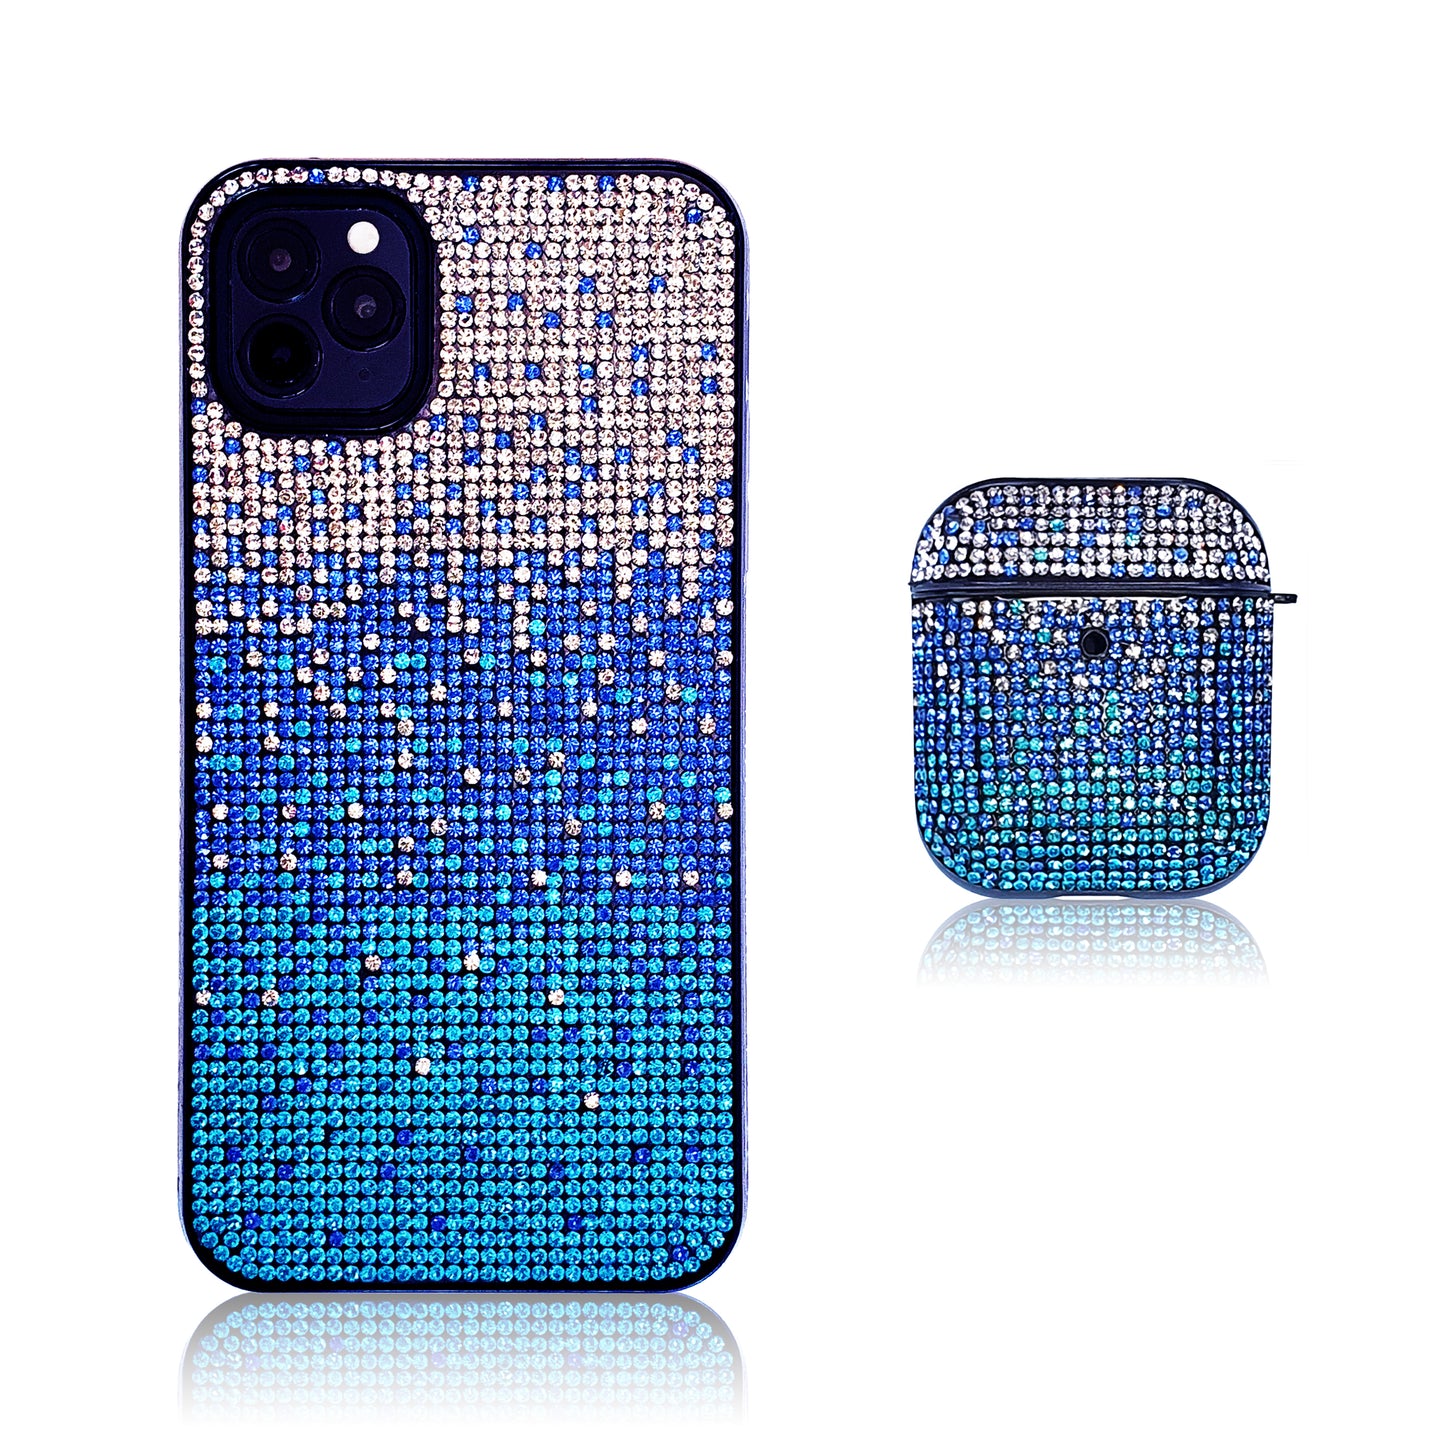 Crystal Gradient Blue Silicon iPhone Case with AirPods